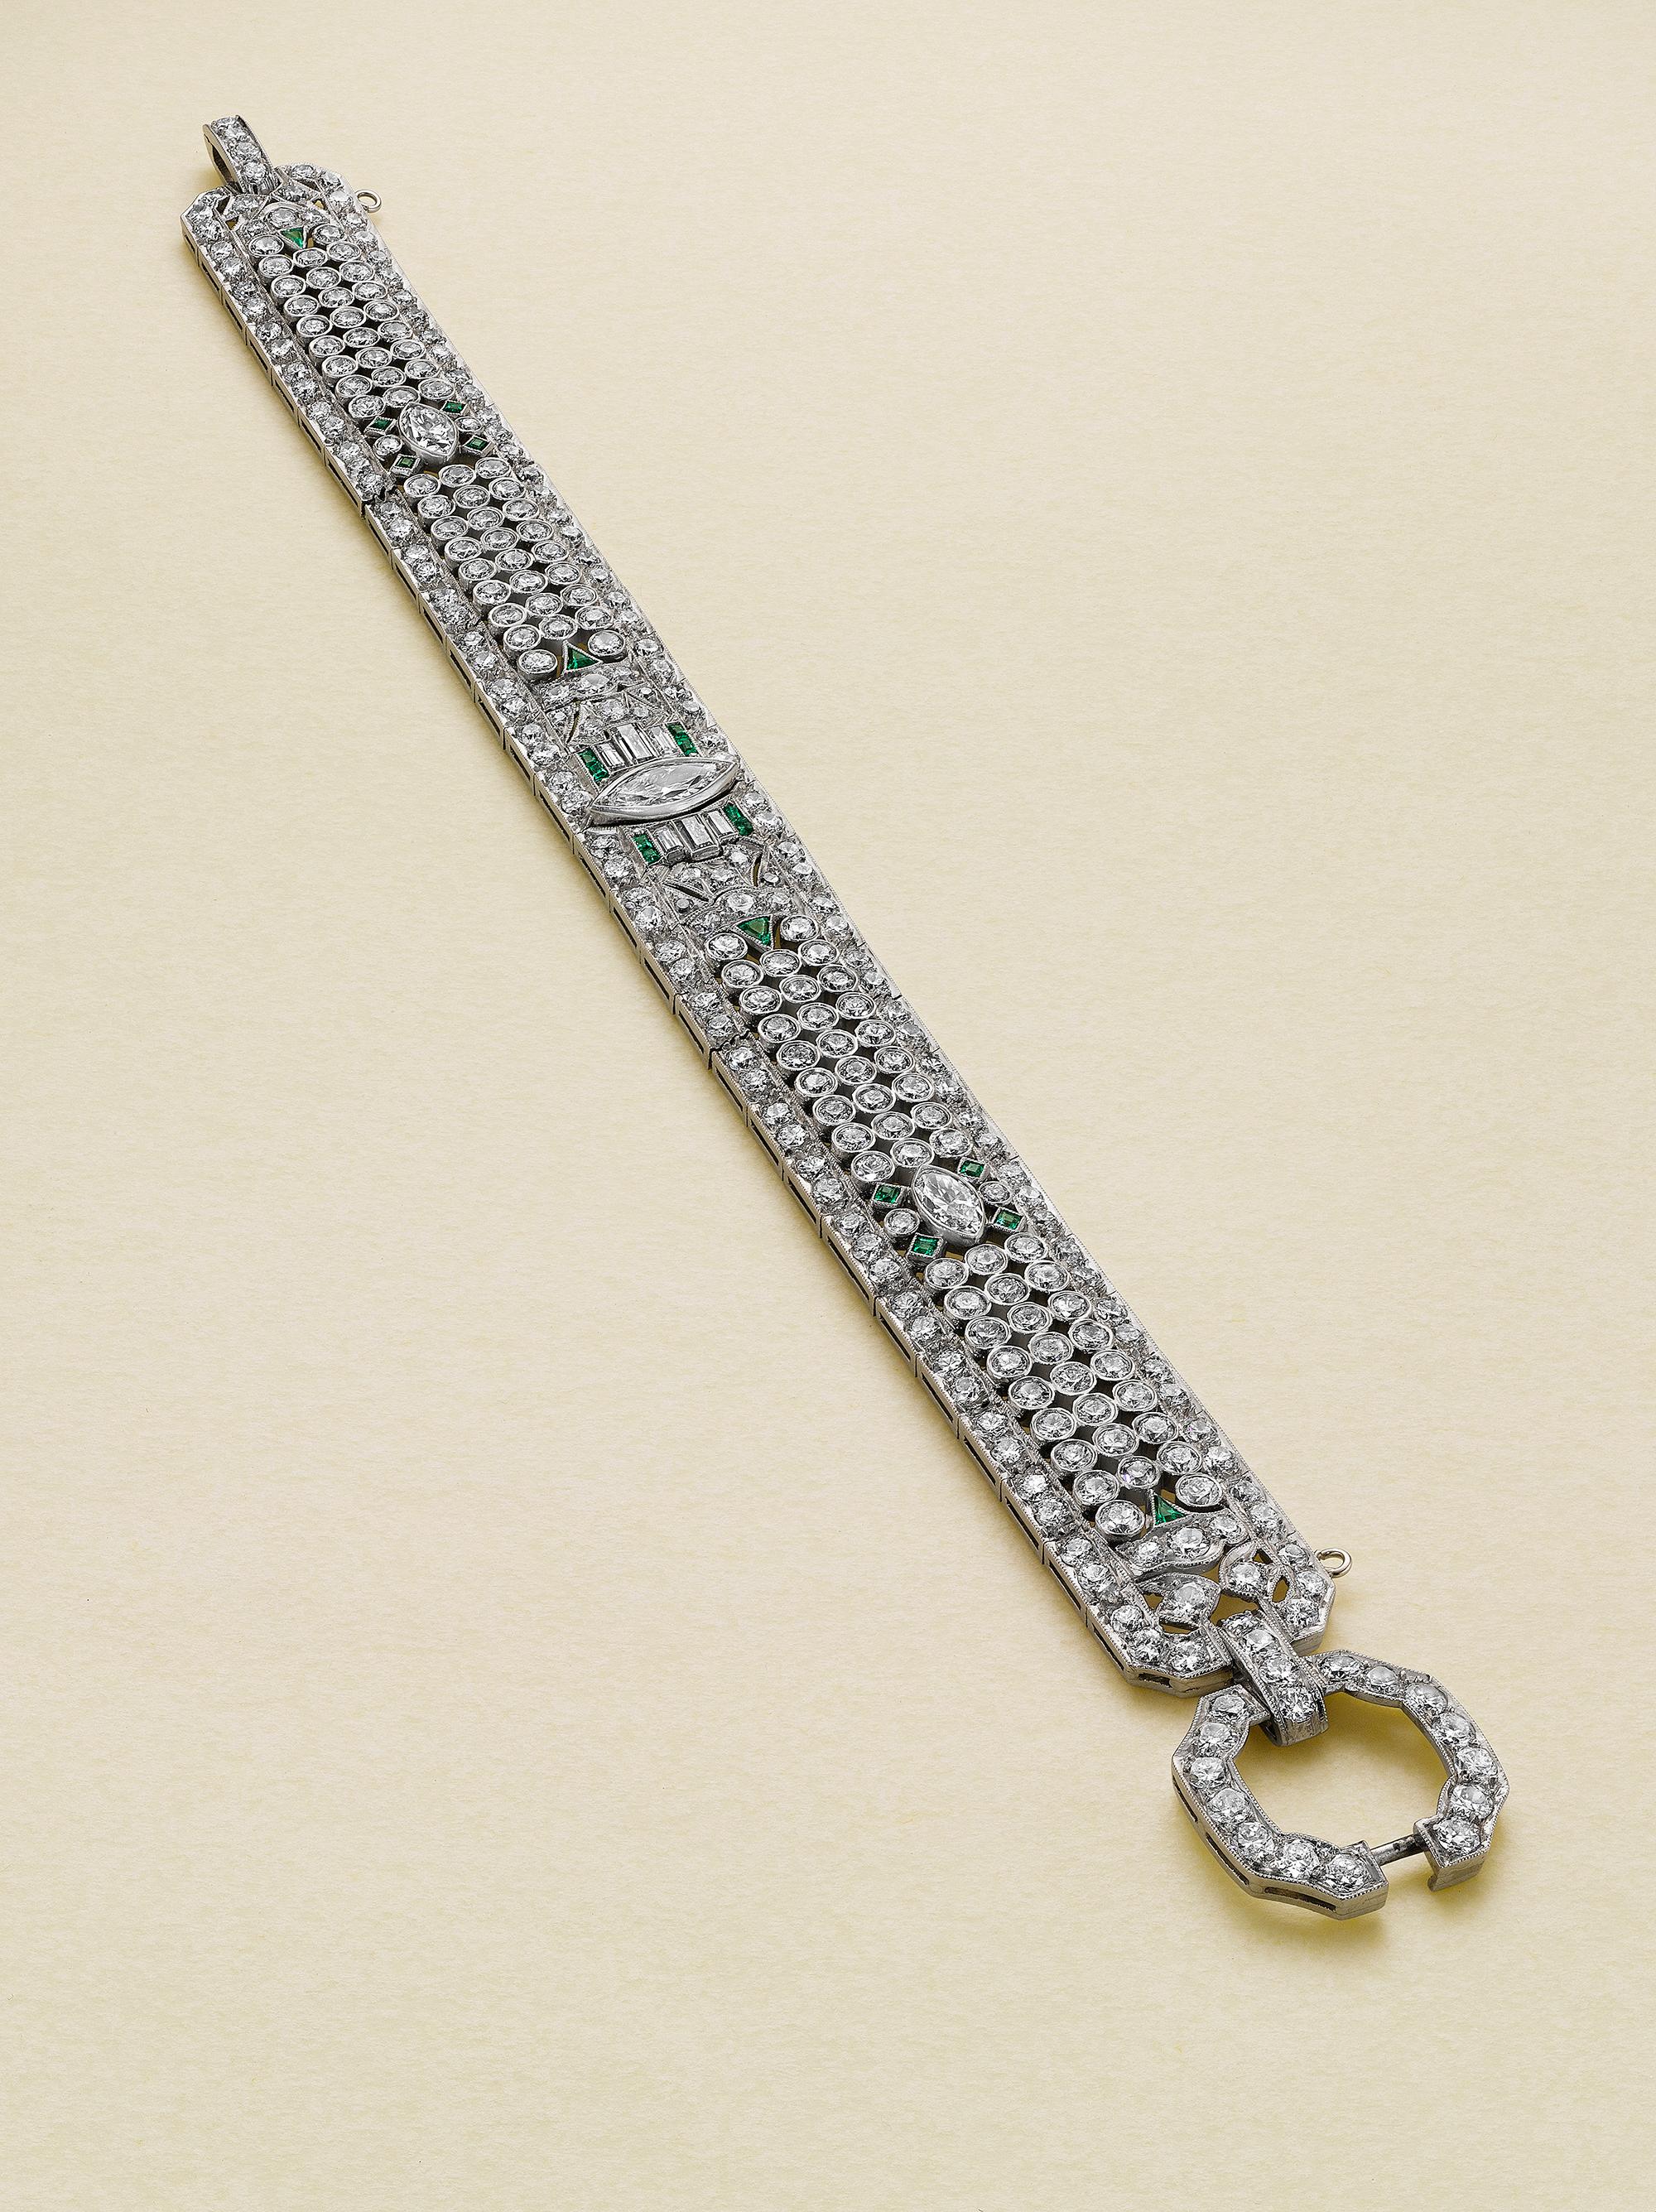 Women's 15.50 Carats Total Mixed-Cut Diamond and Emerald Antique Fashion Bracelet For Sale